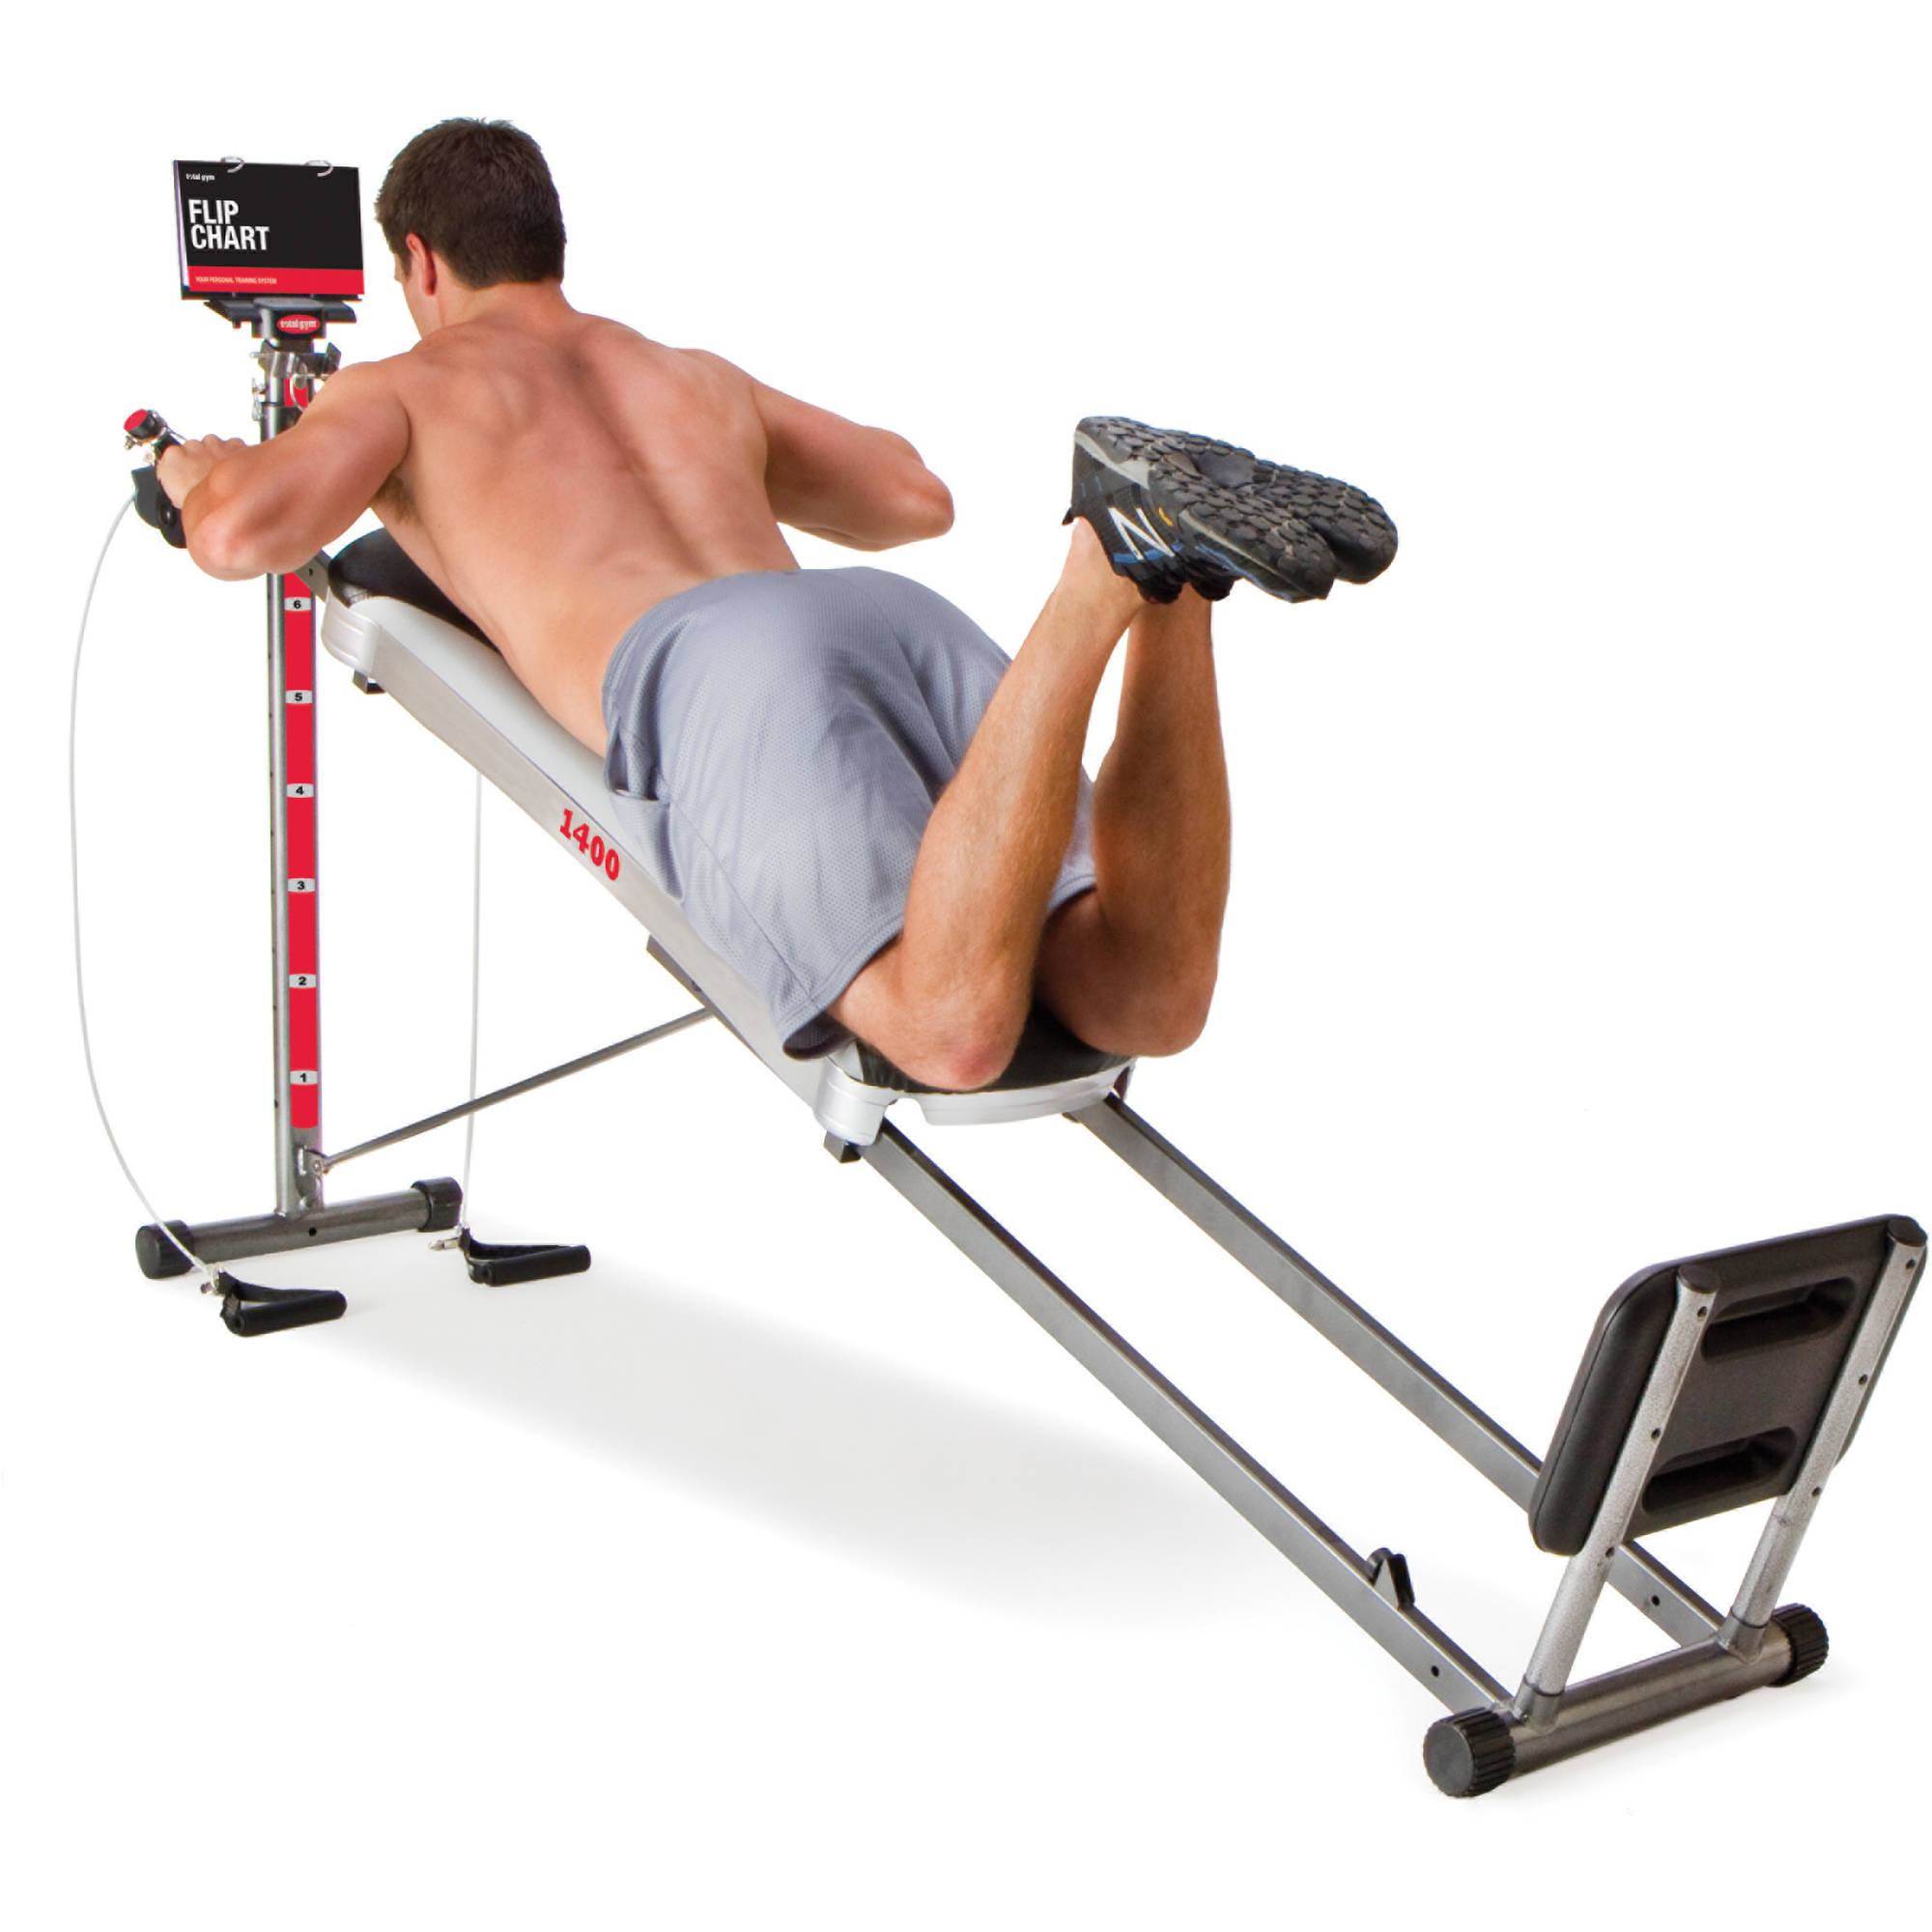 Total Gym 1400 Deluxe Home Fitness Exercise Machine Equipment with Workout DVD - image 7 of 15